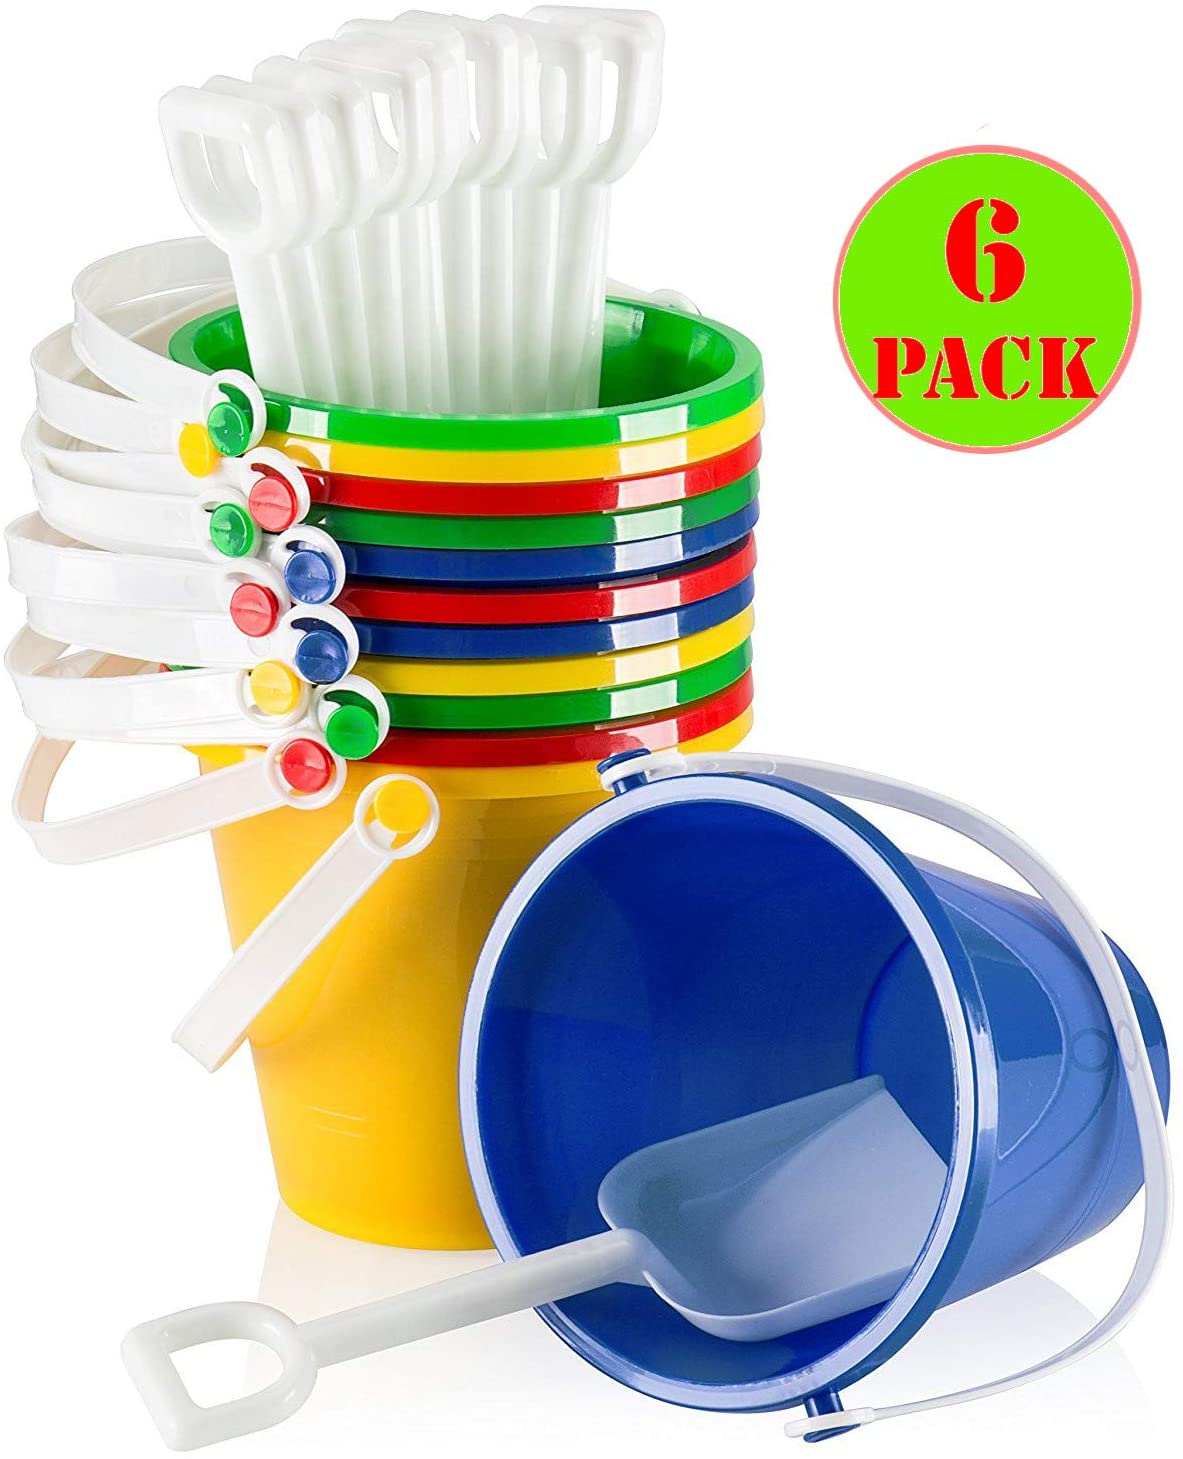 JoyX 5" Inch Beach Pails Sand Buckets and Sand Shovels Set for Kids | Beach and Sand Toys at The Beach | Use for Sand Molds at The Sandbox (Pack of 6 Sets) - image 1 of 7